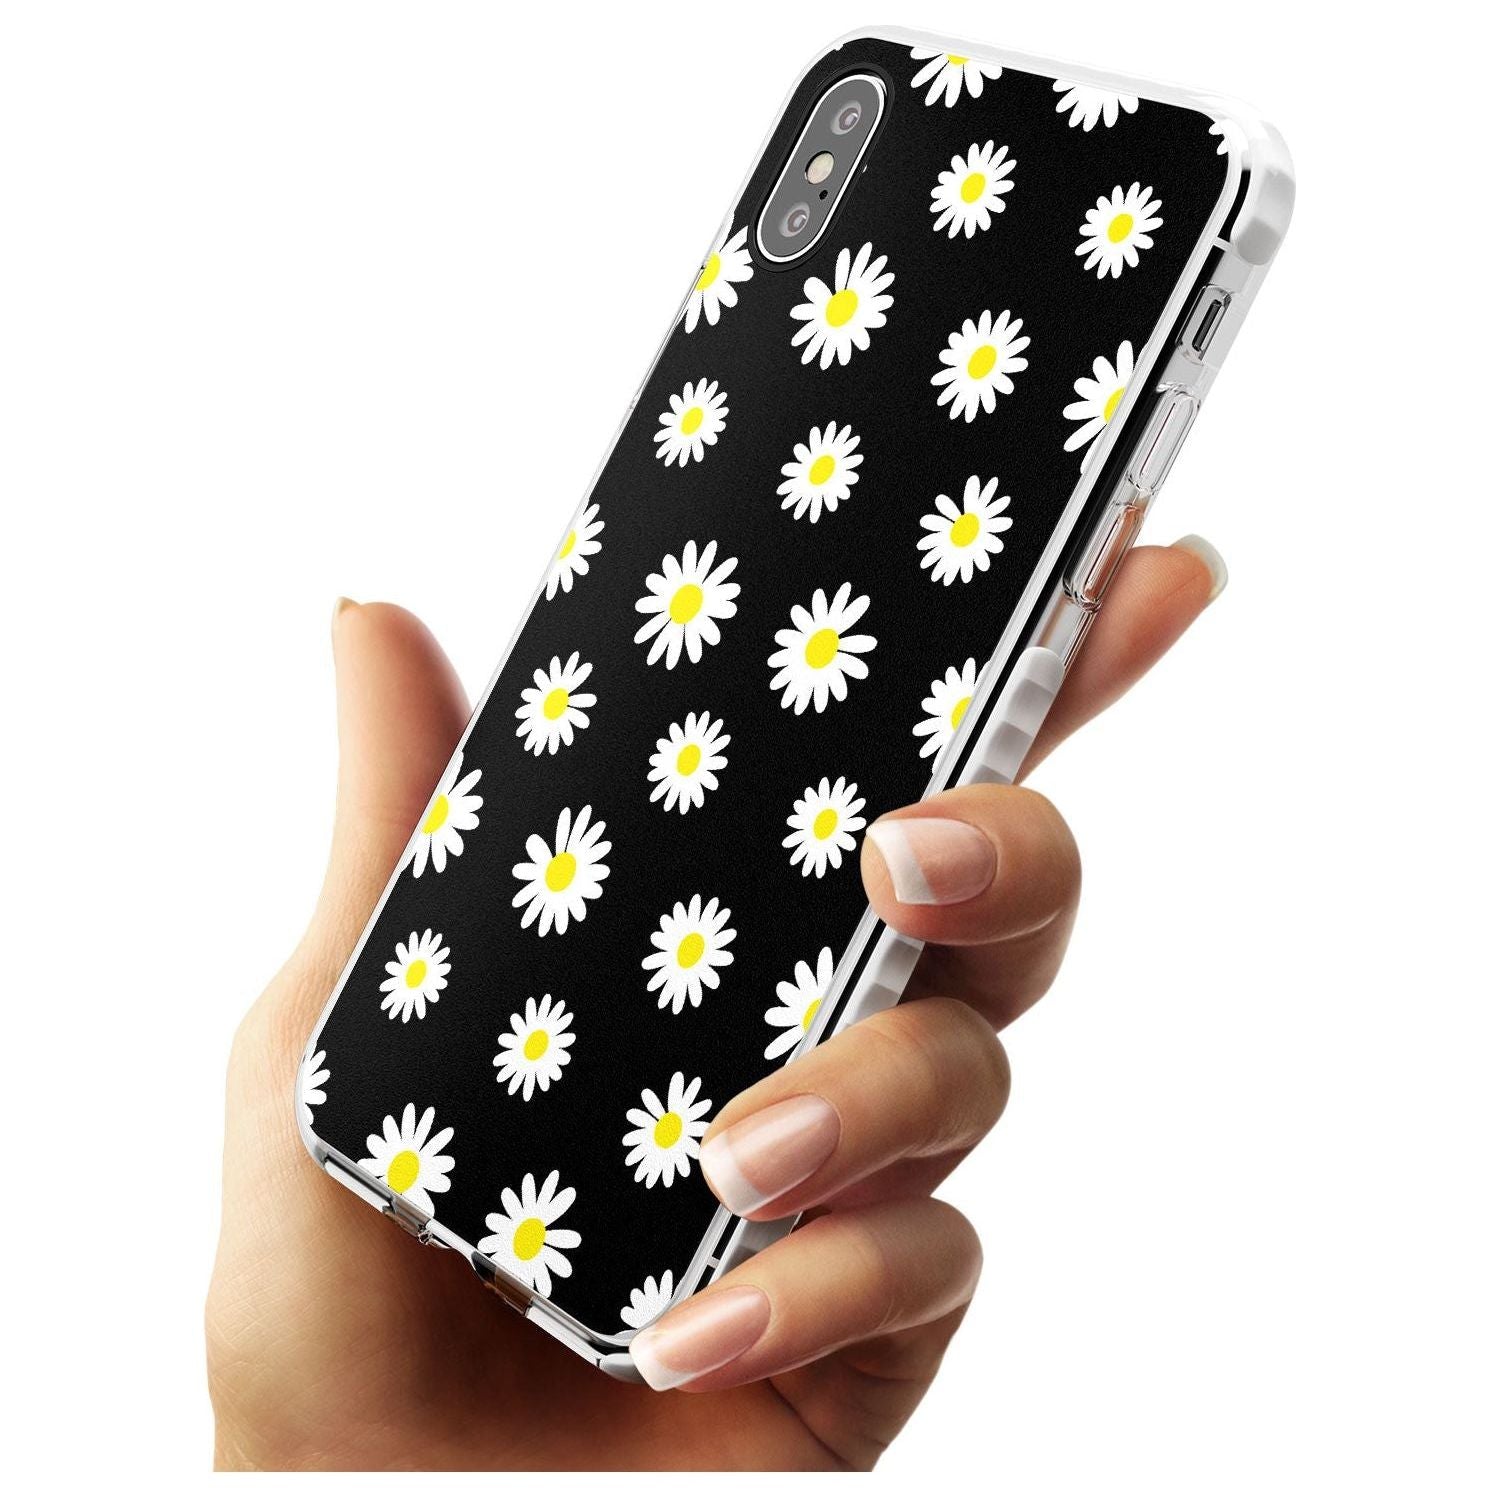 White Daisy Pattern (Black) Impact Phone Case for iPhone X XS Max XR